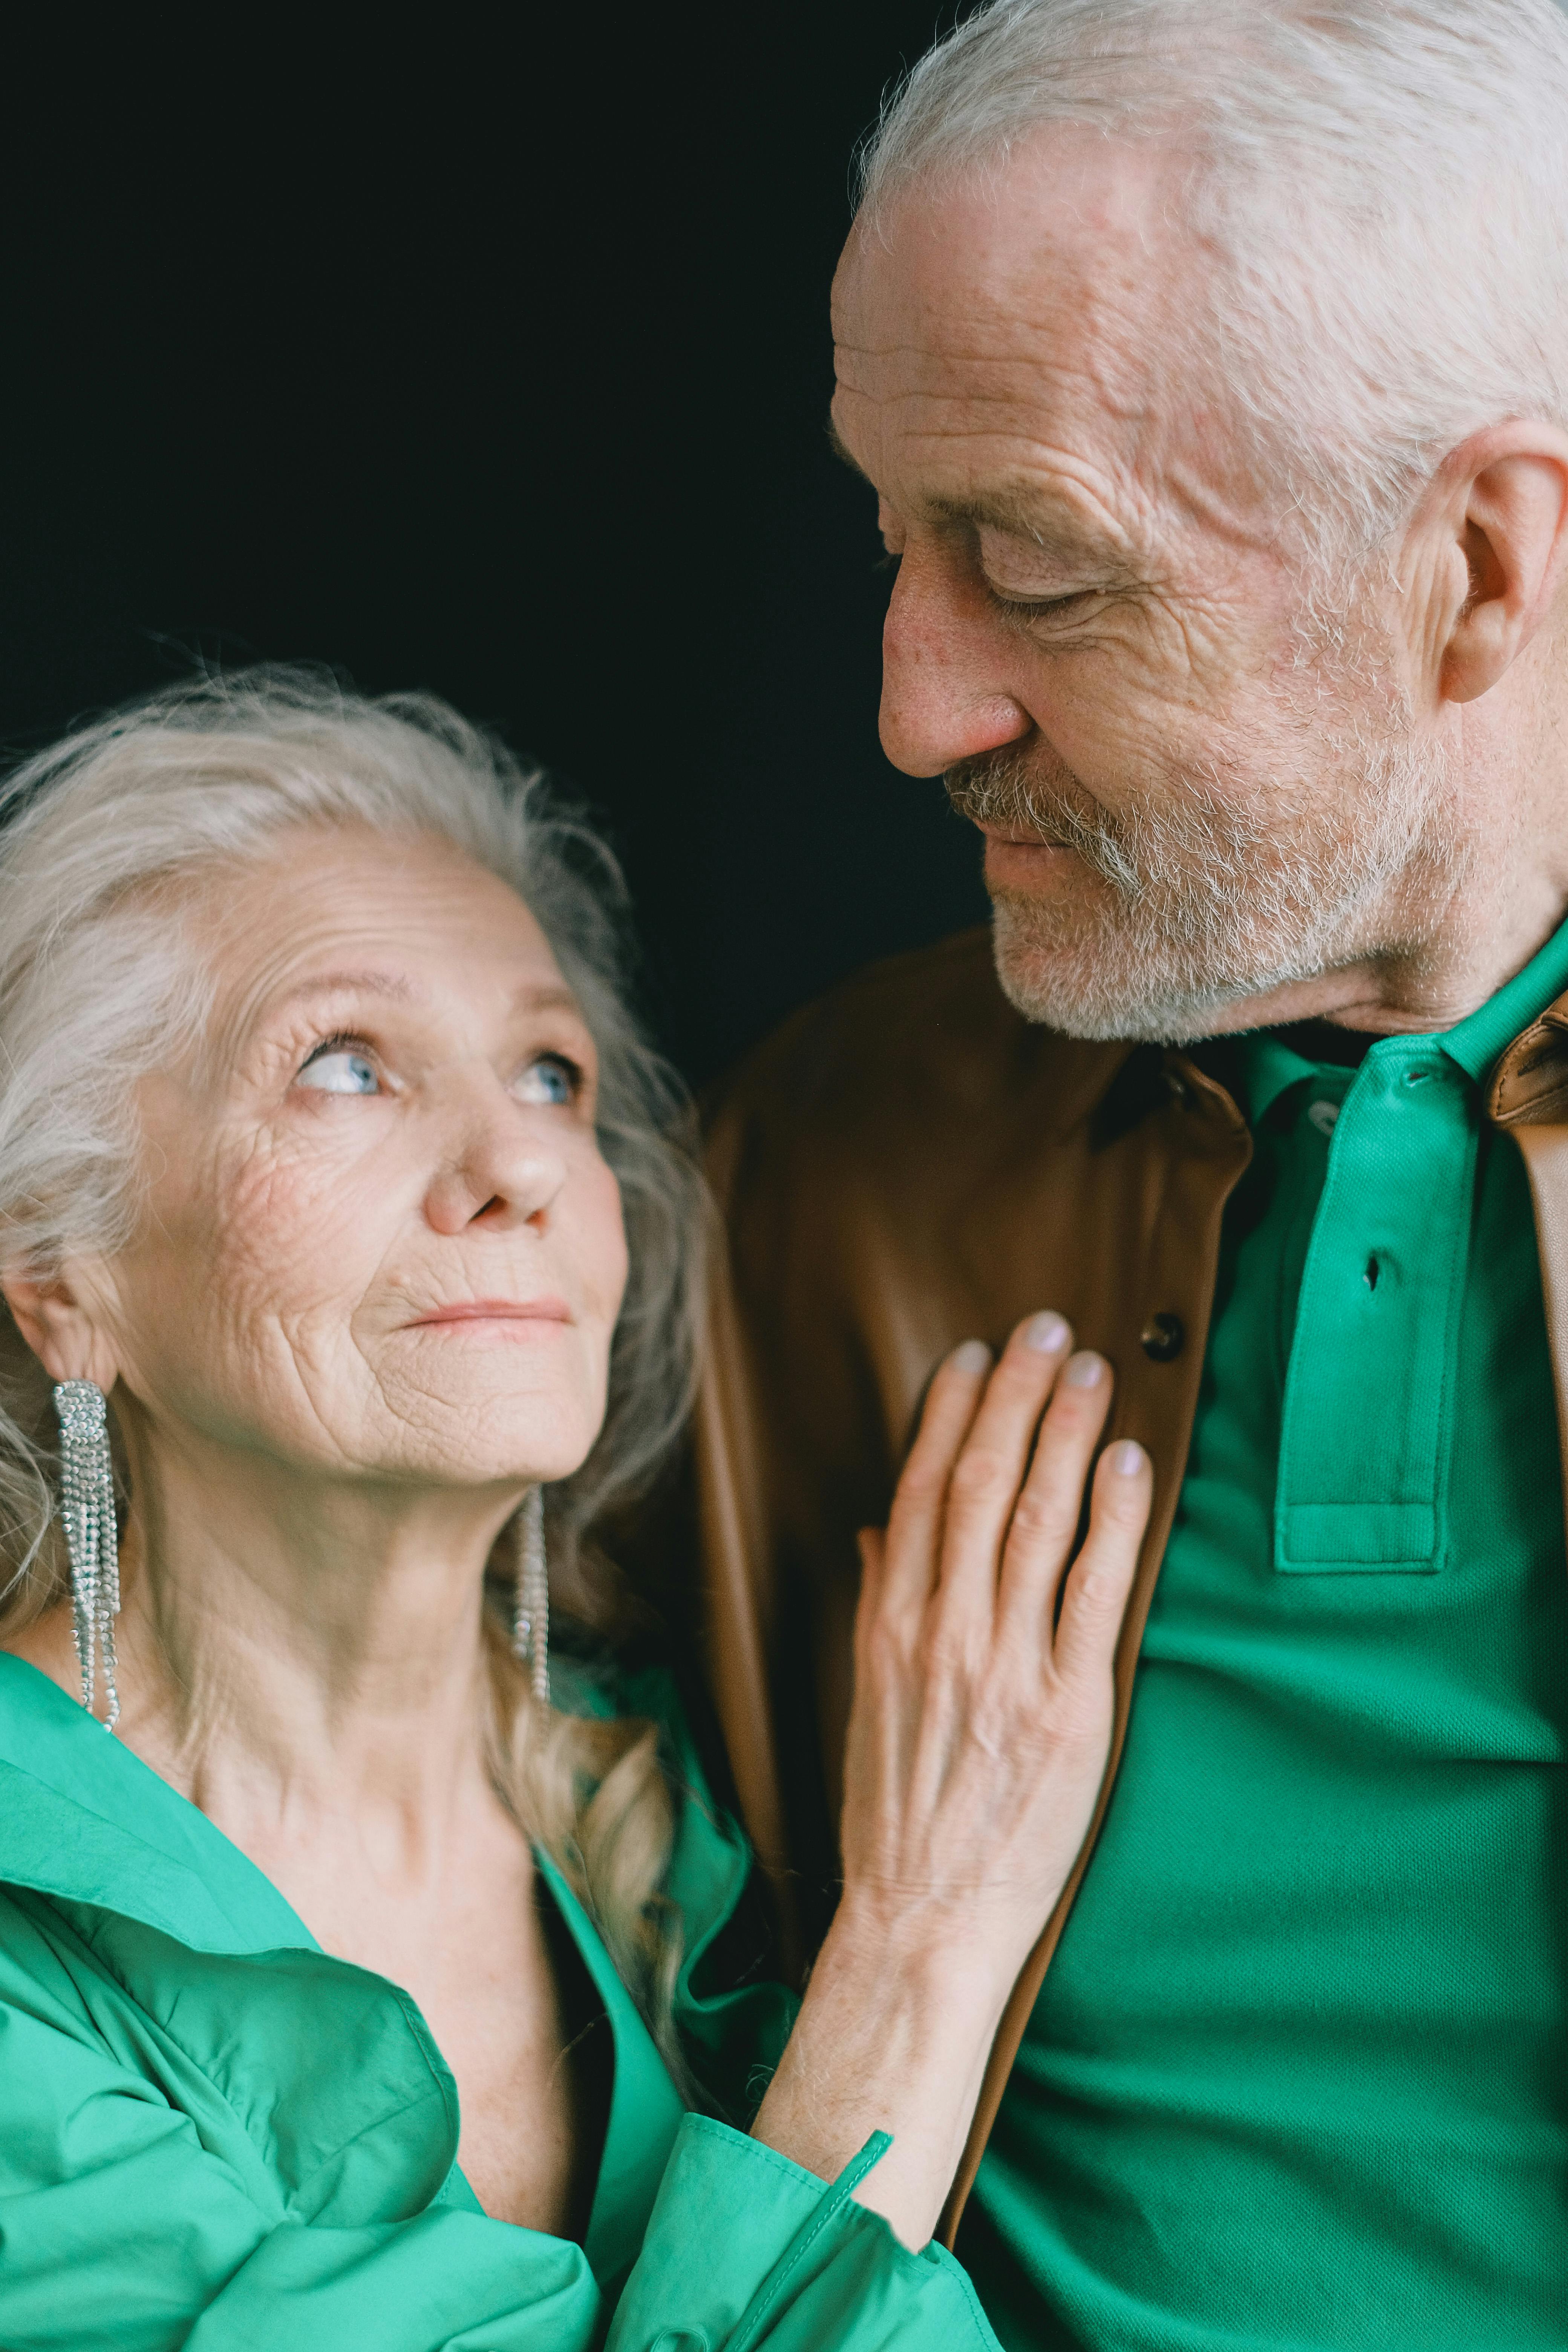 An emotional couple looking lovingly at each other | Source: Pexels